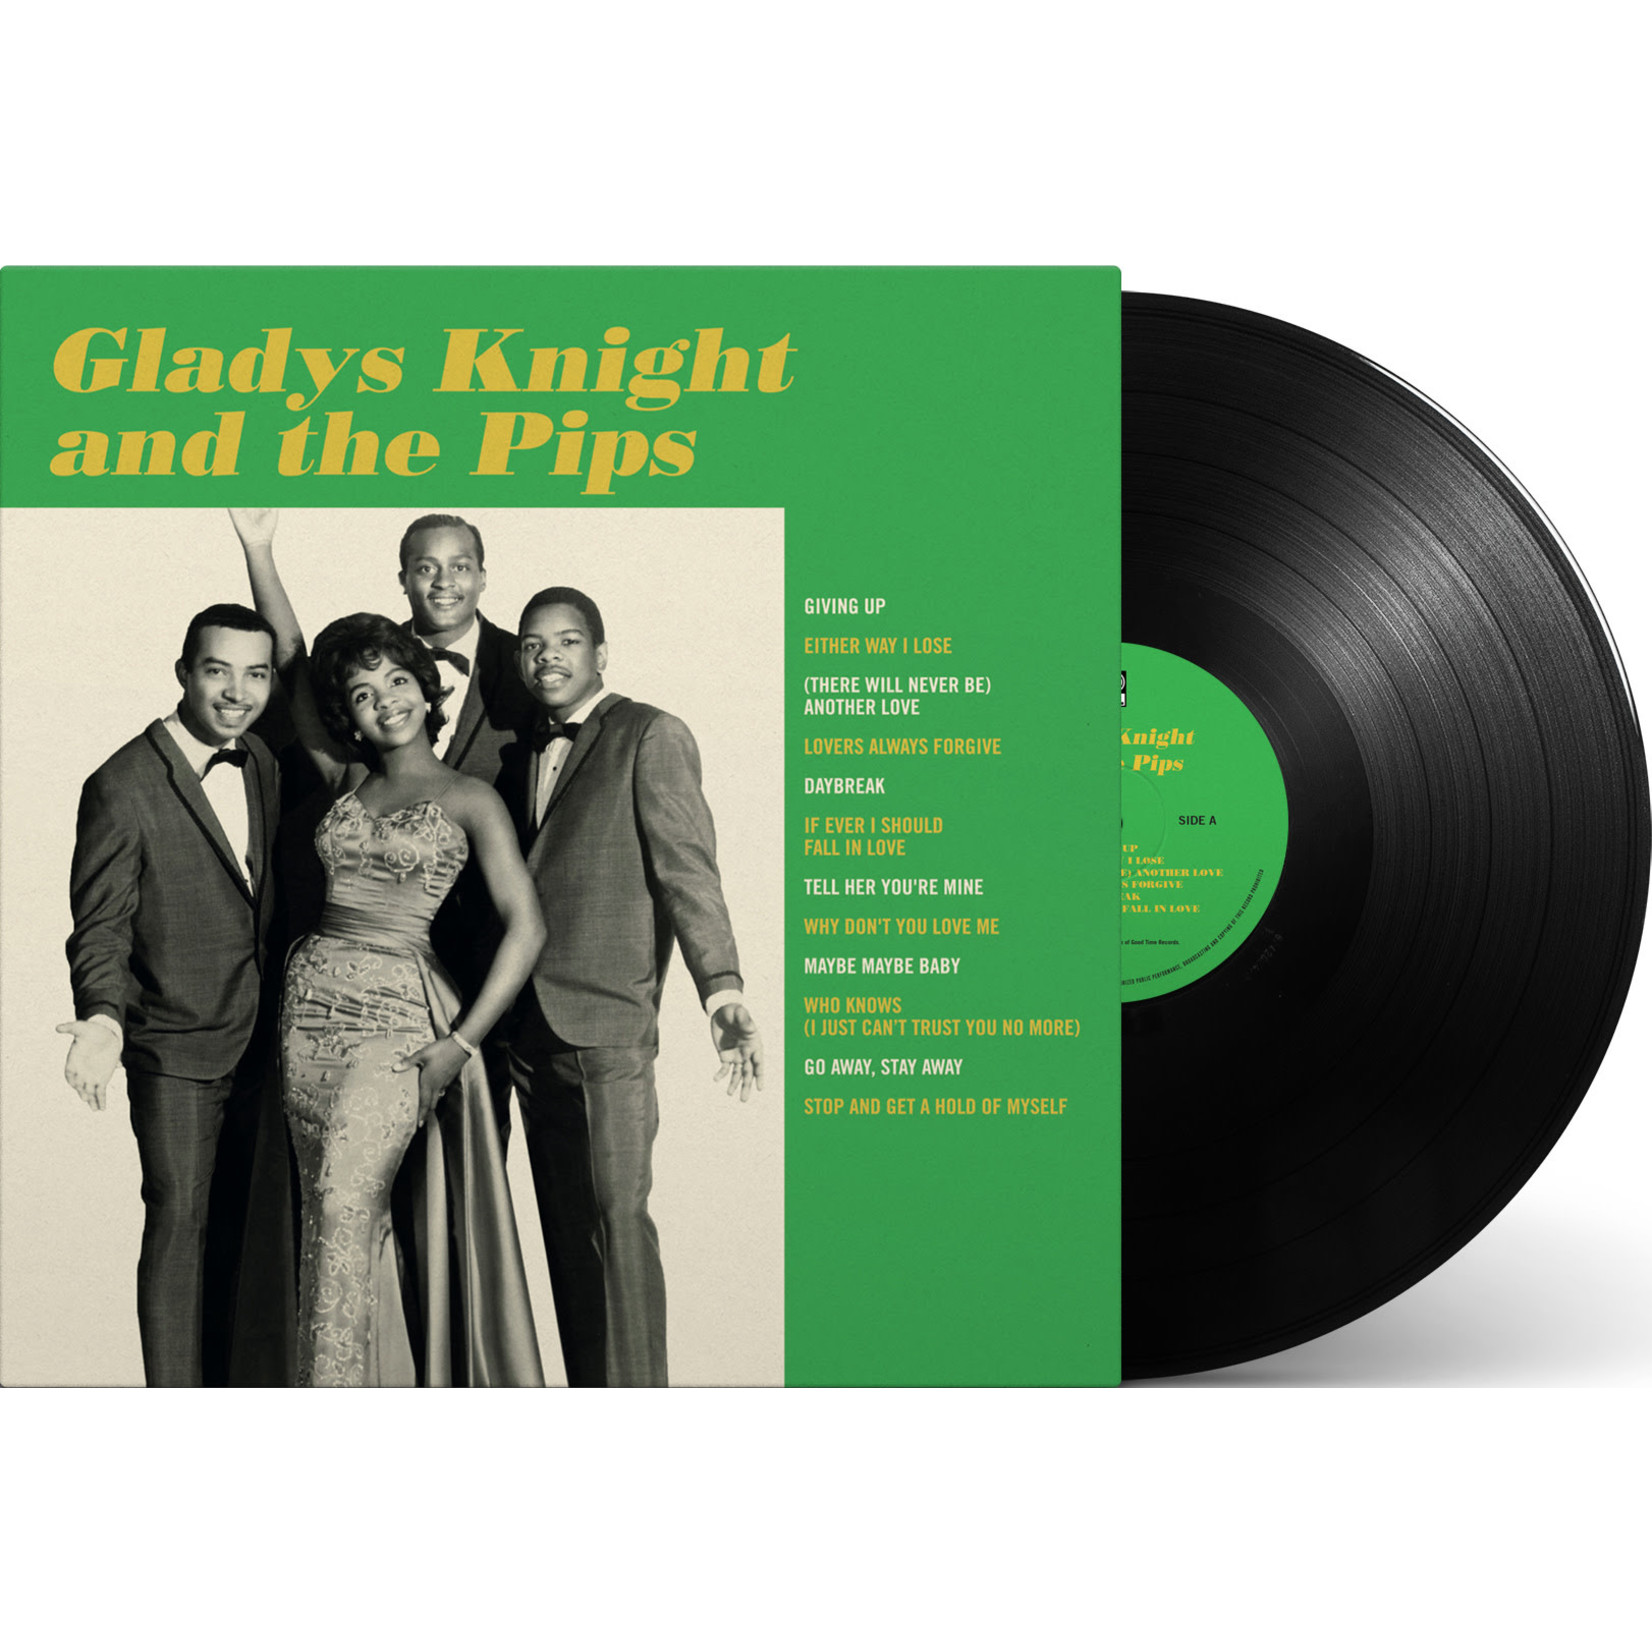 RSD Black Friday 2011-2022 Gladys Knight & The Pips - Gladys Knight & The Pips (LP)